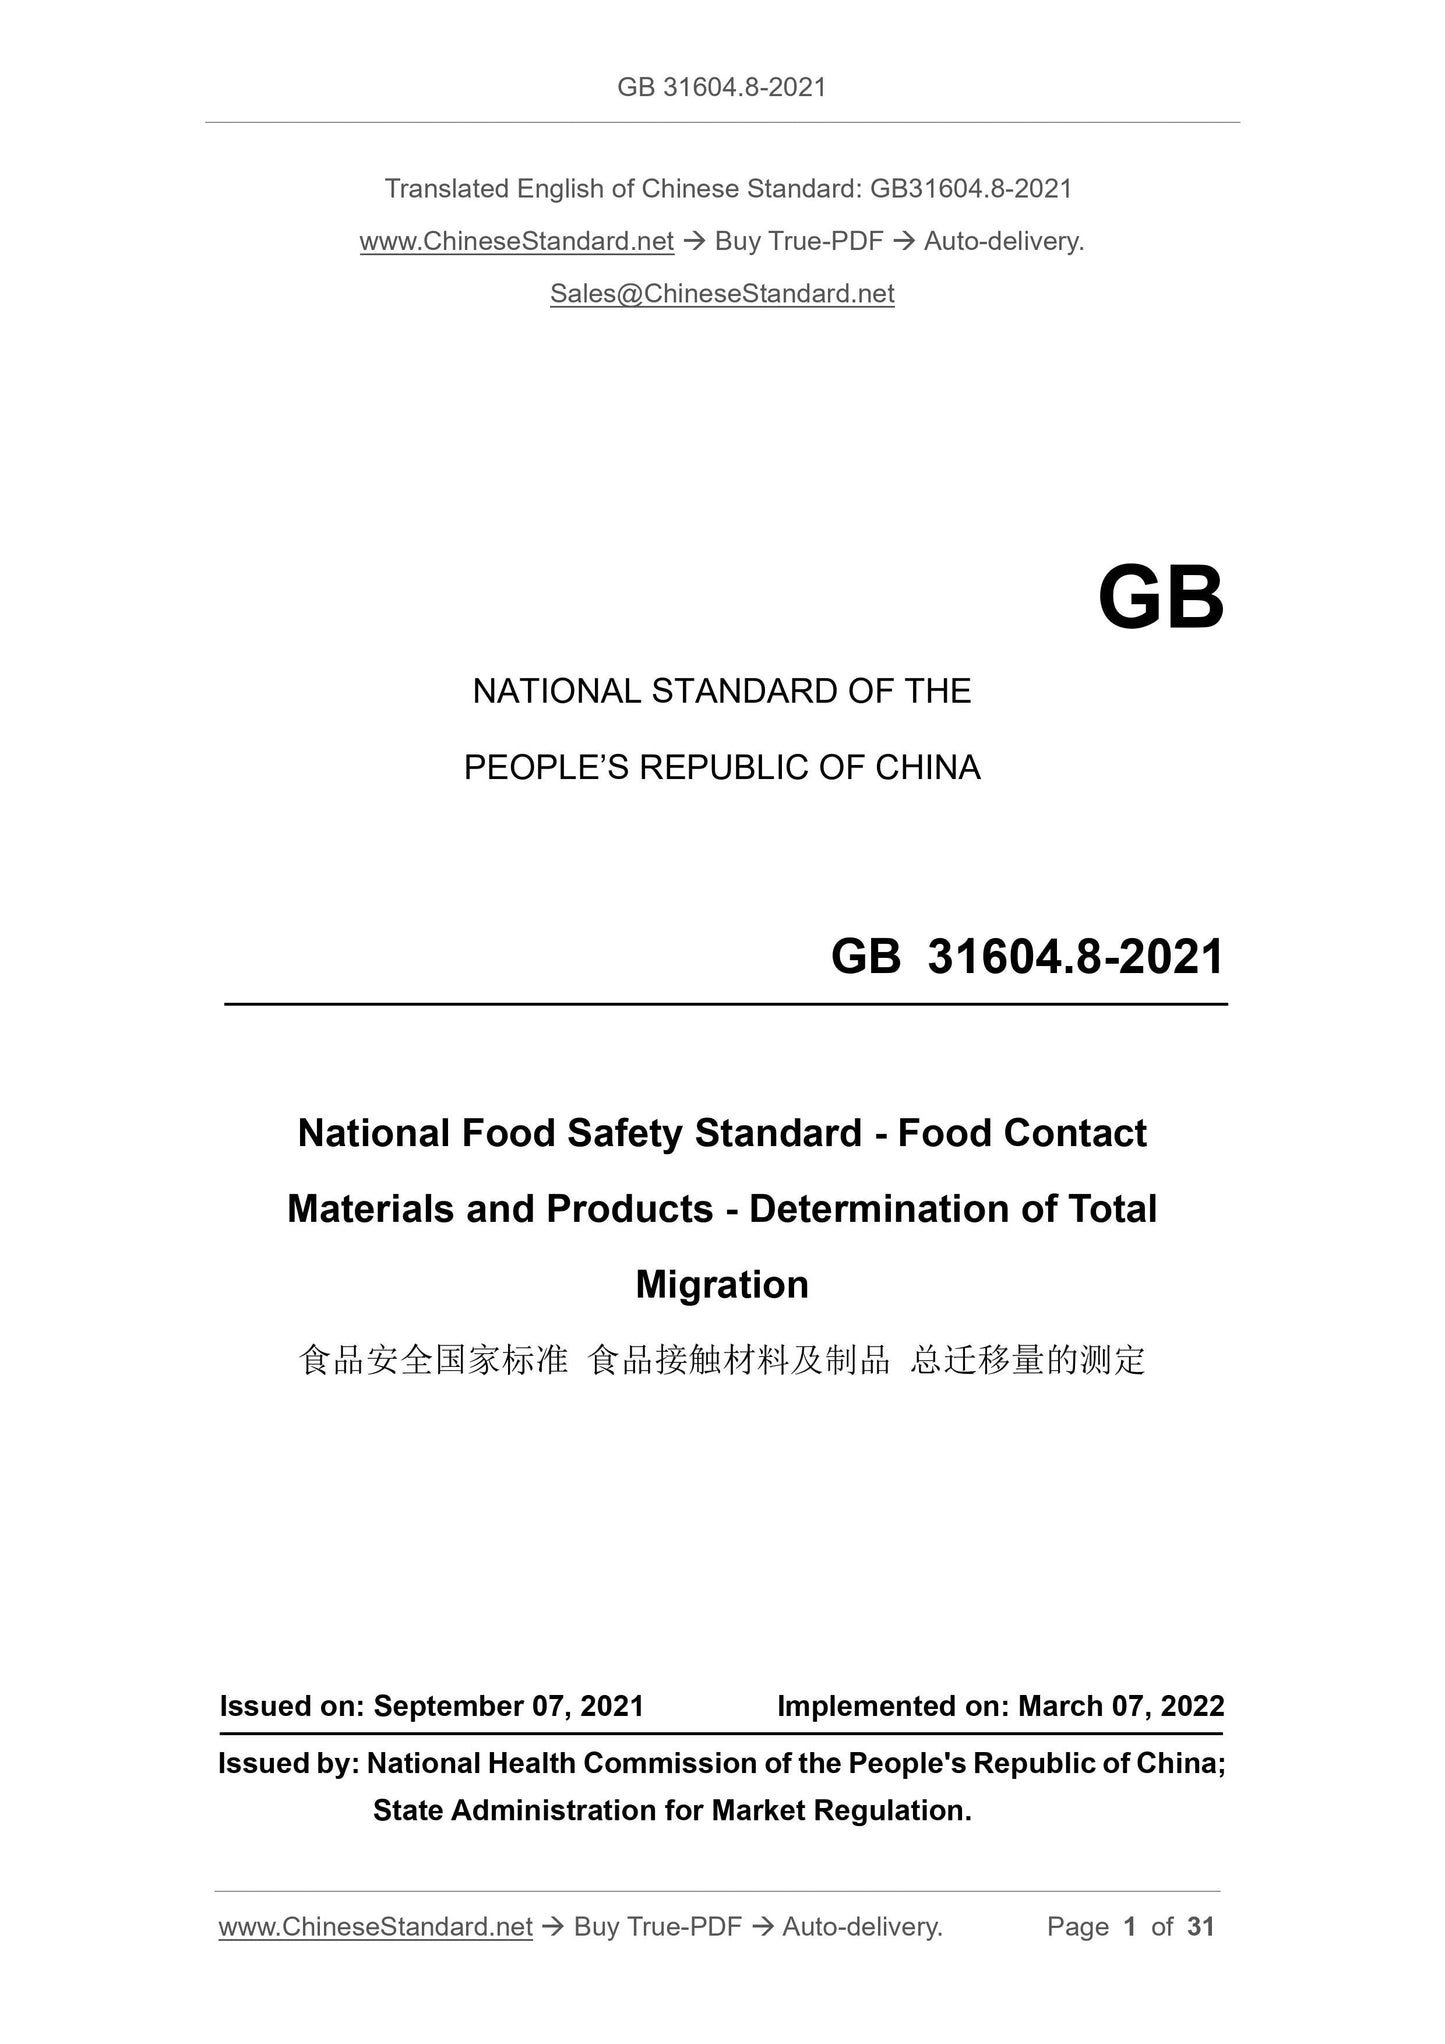 GB 31604.8-2021 Page 1